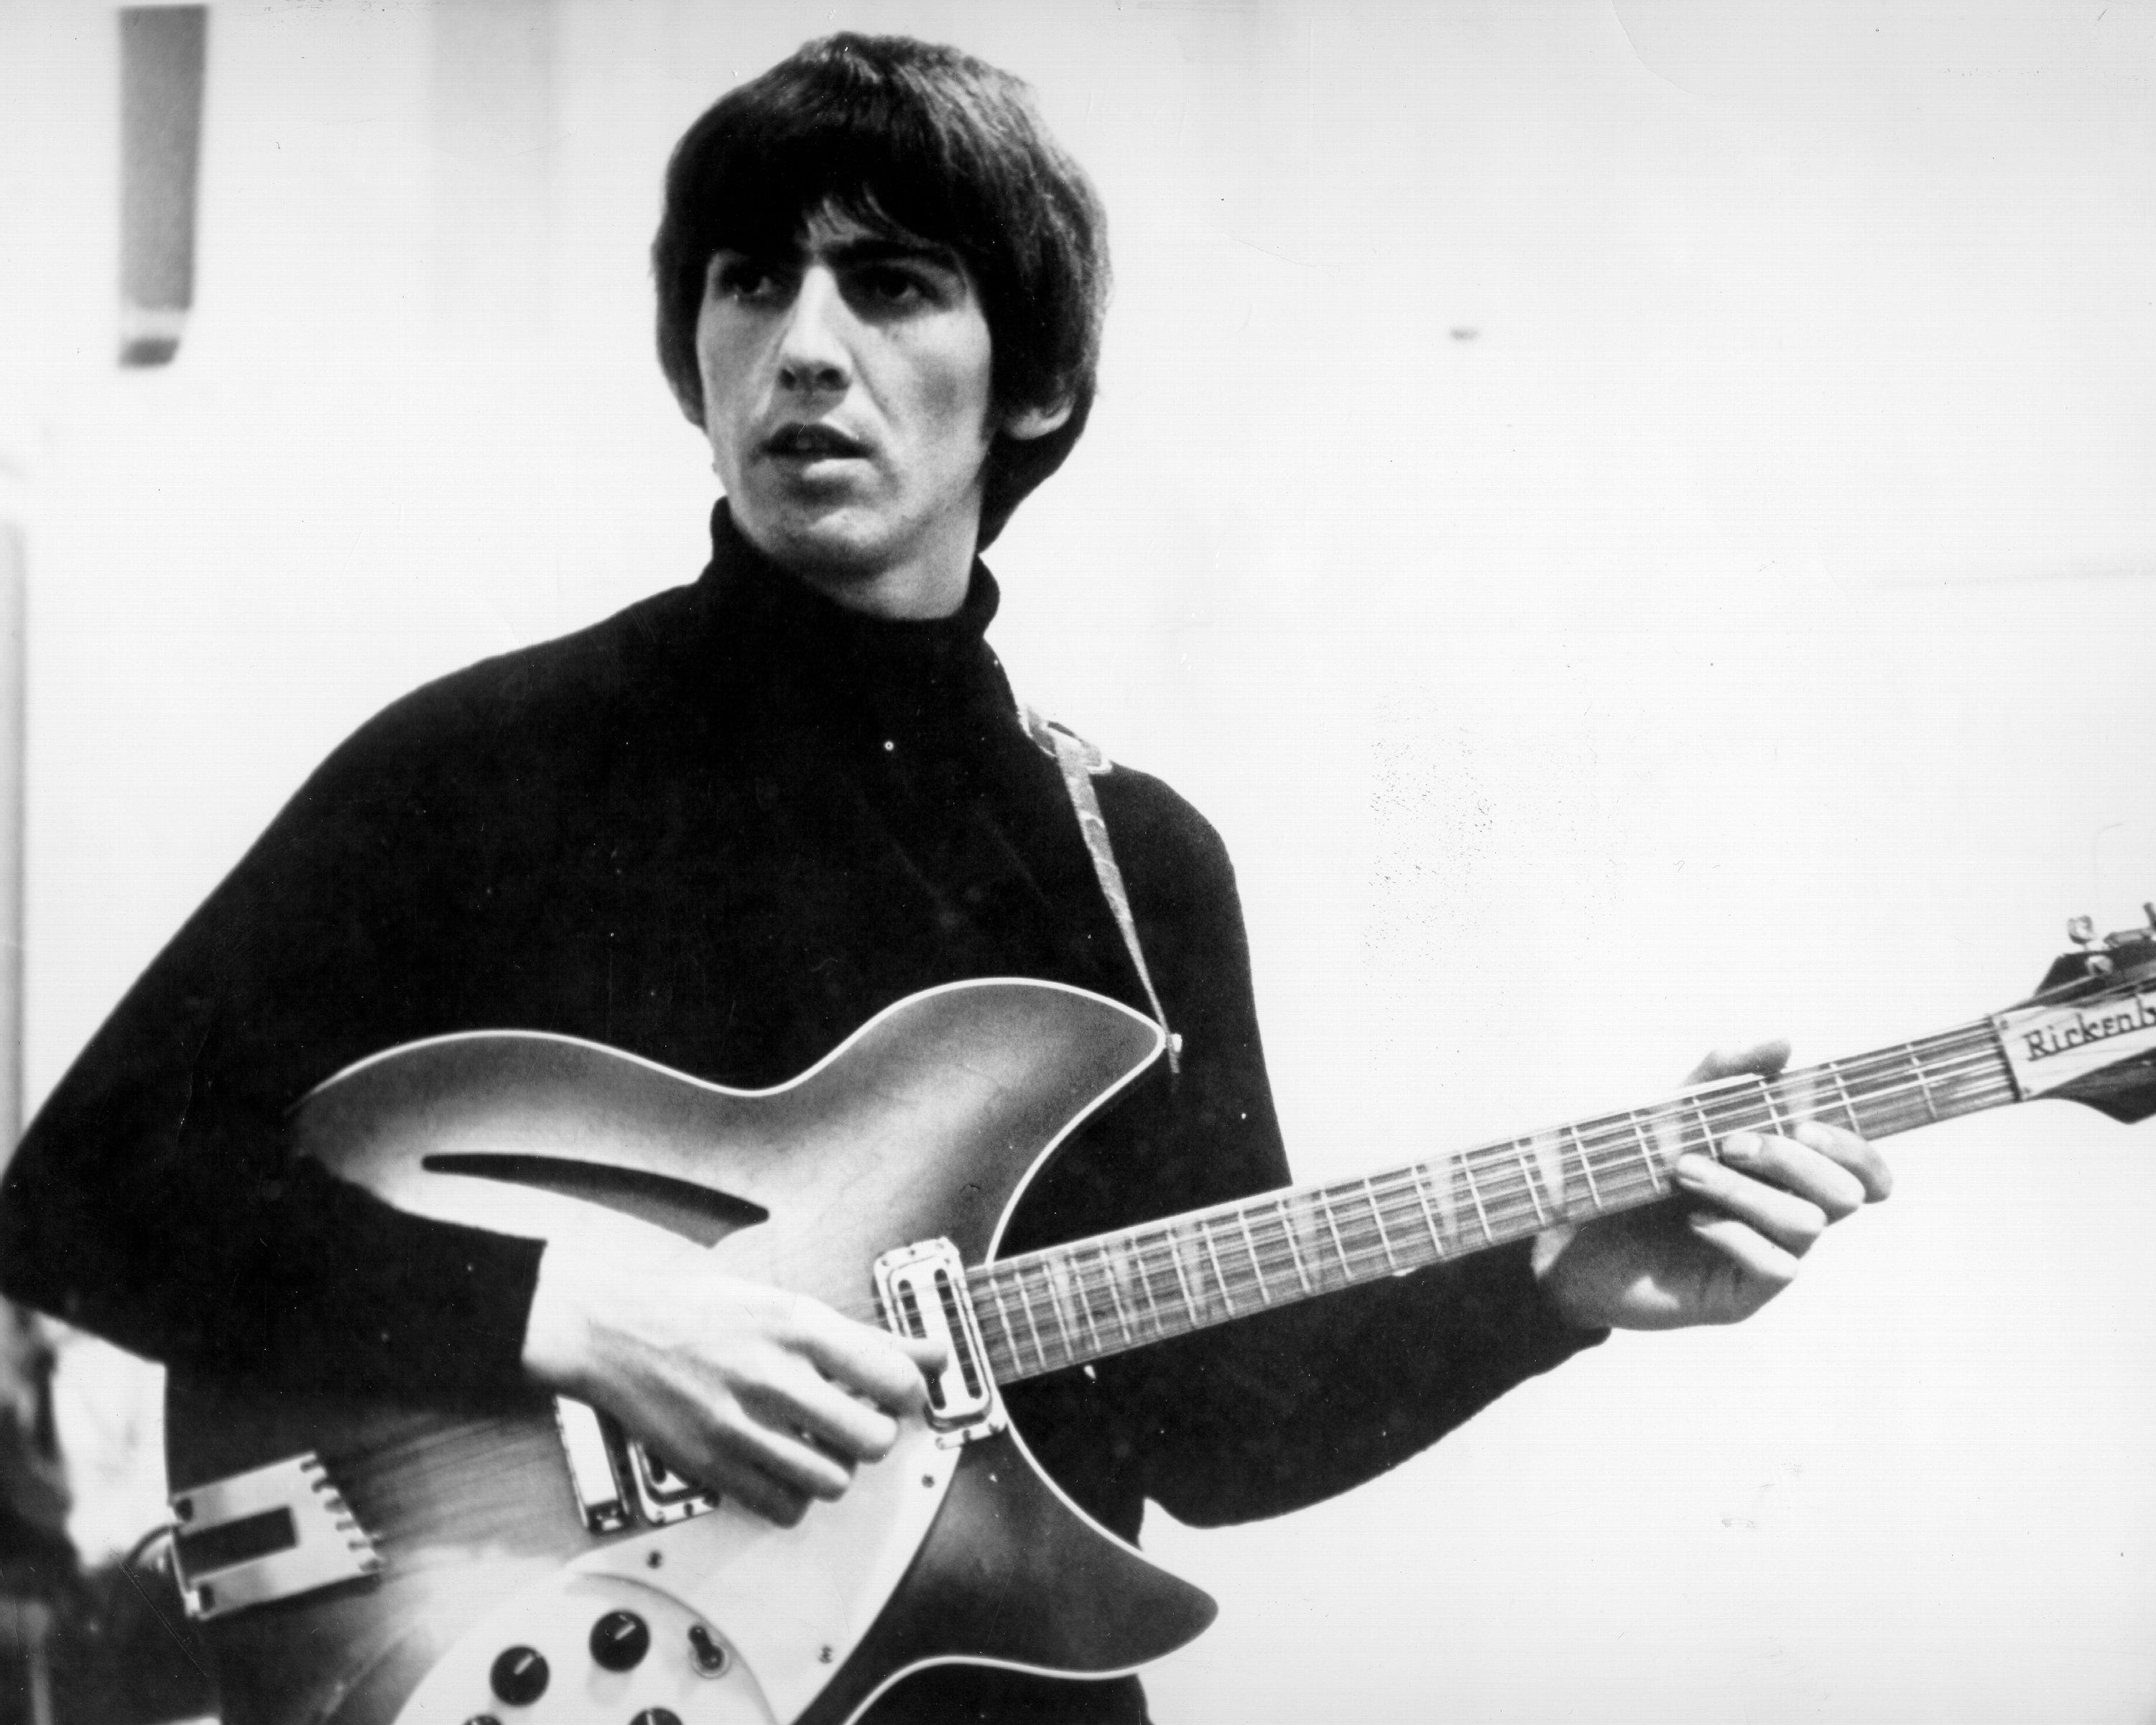 The Beatles' George Harrison with a guitar